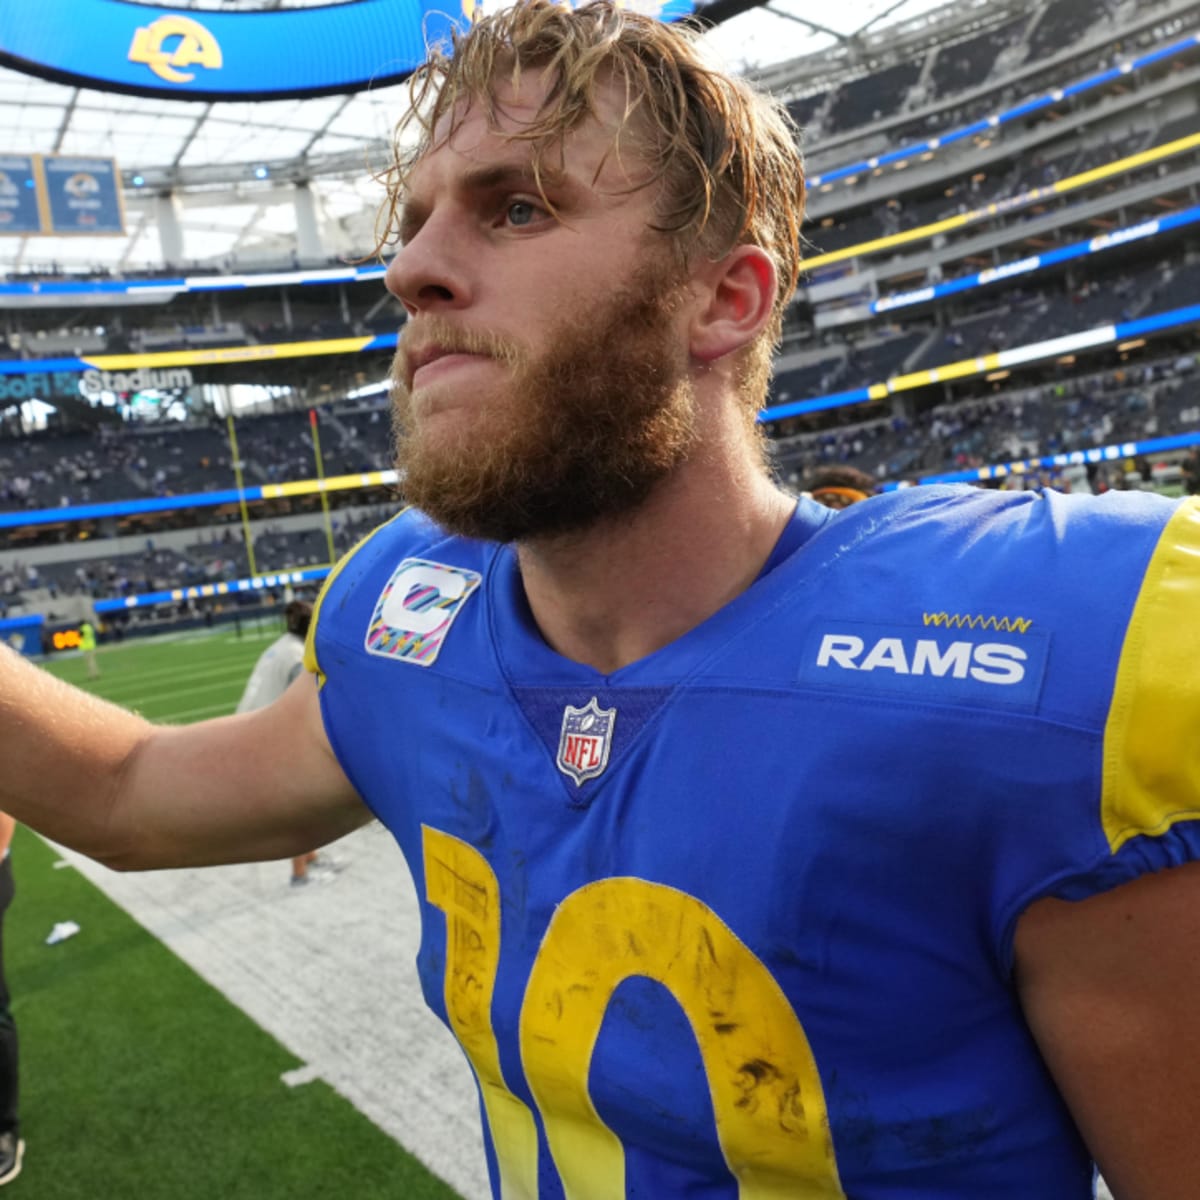 Cooper Kupp: He and Rams trainers 'all feel good about where we're at, feel  like we're making good time on things' with ankle rehab